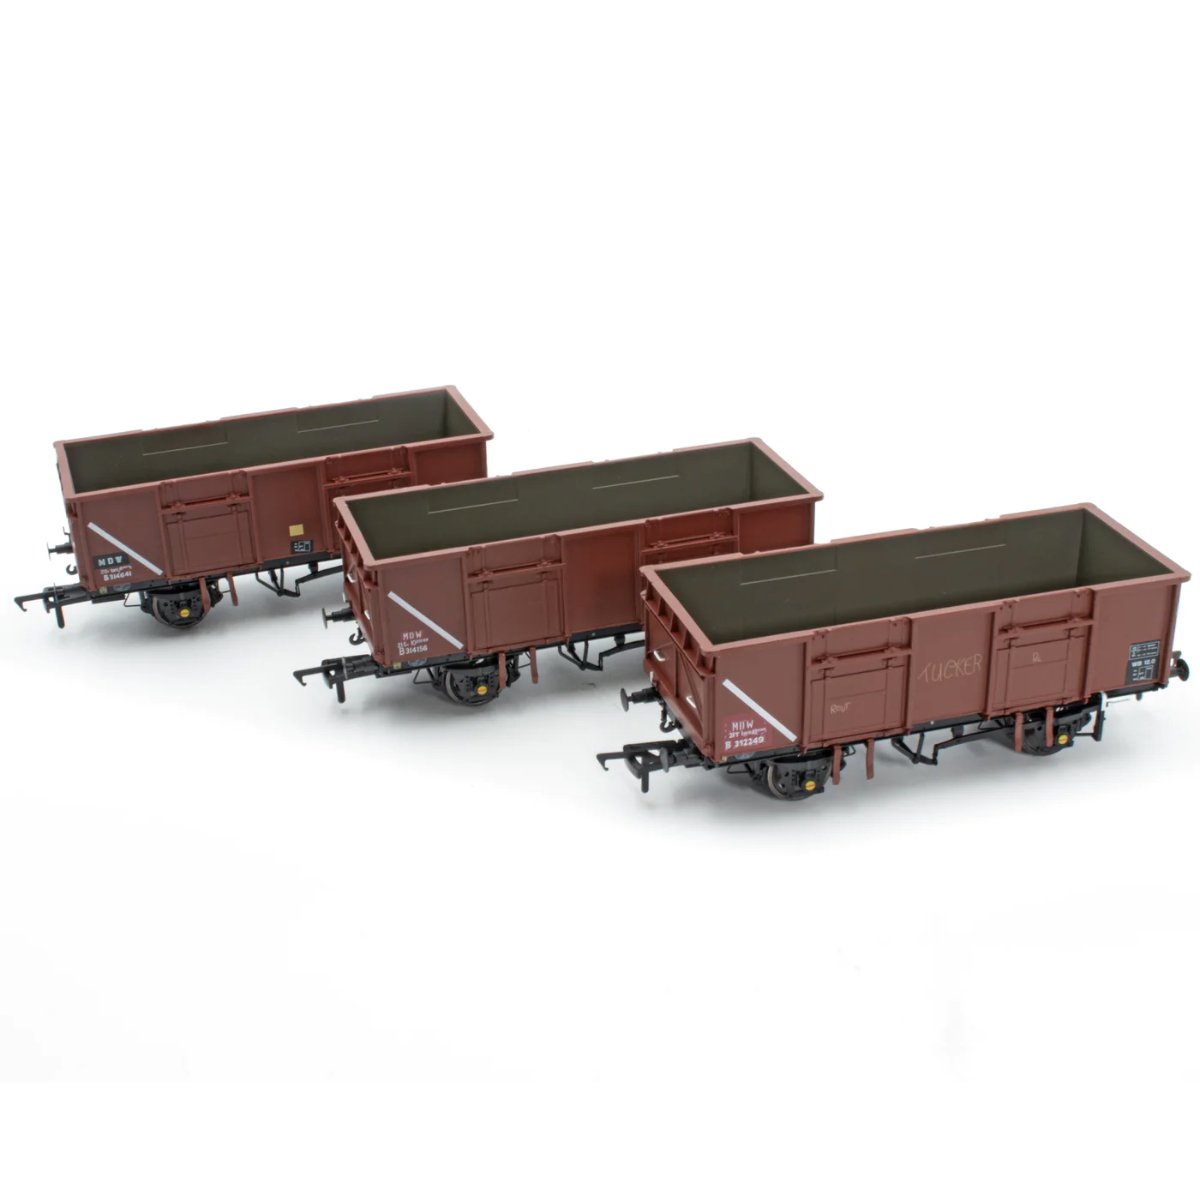 Accurascale BR 21T MDW Mineral Wagon TOPS Bauxite Pack A - OO Gauge - Phillips Hobbies